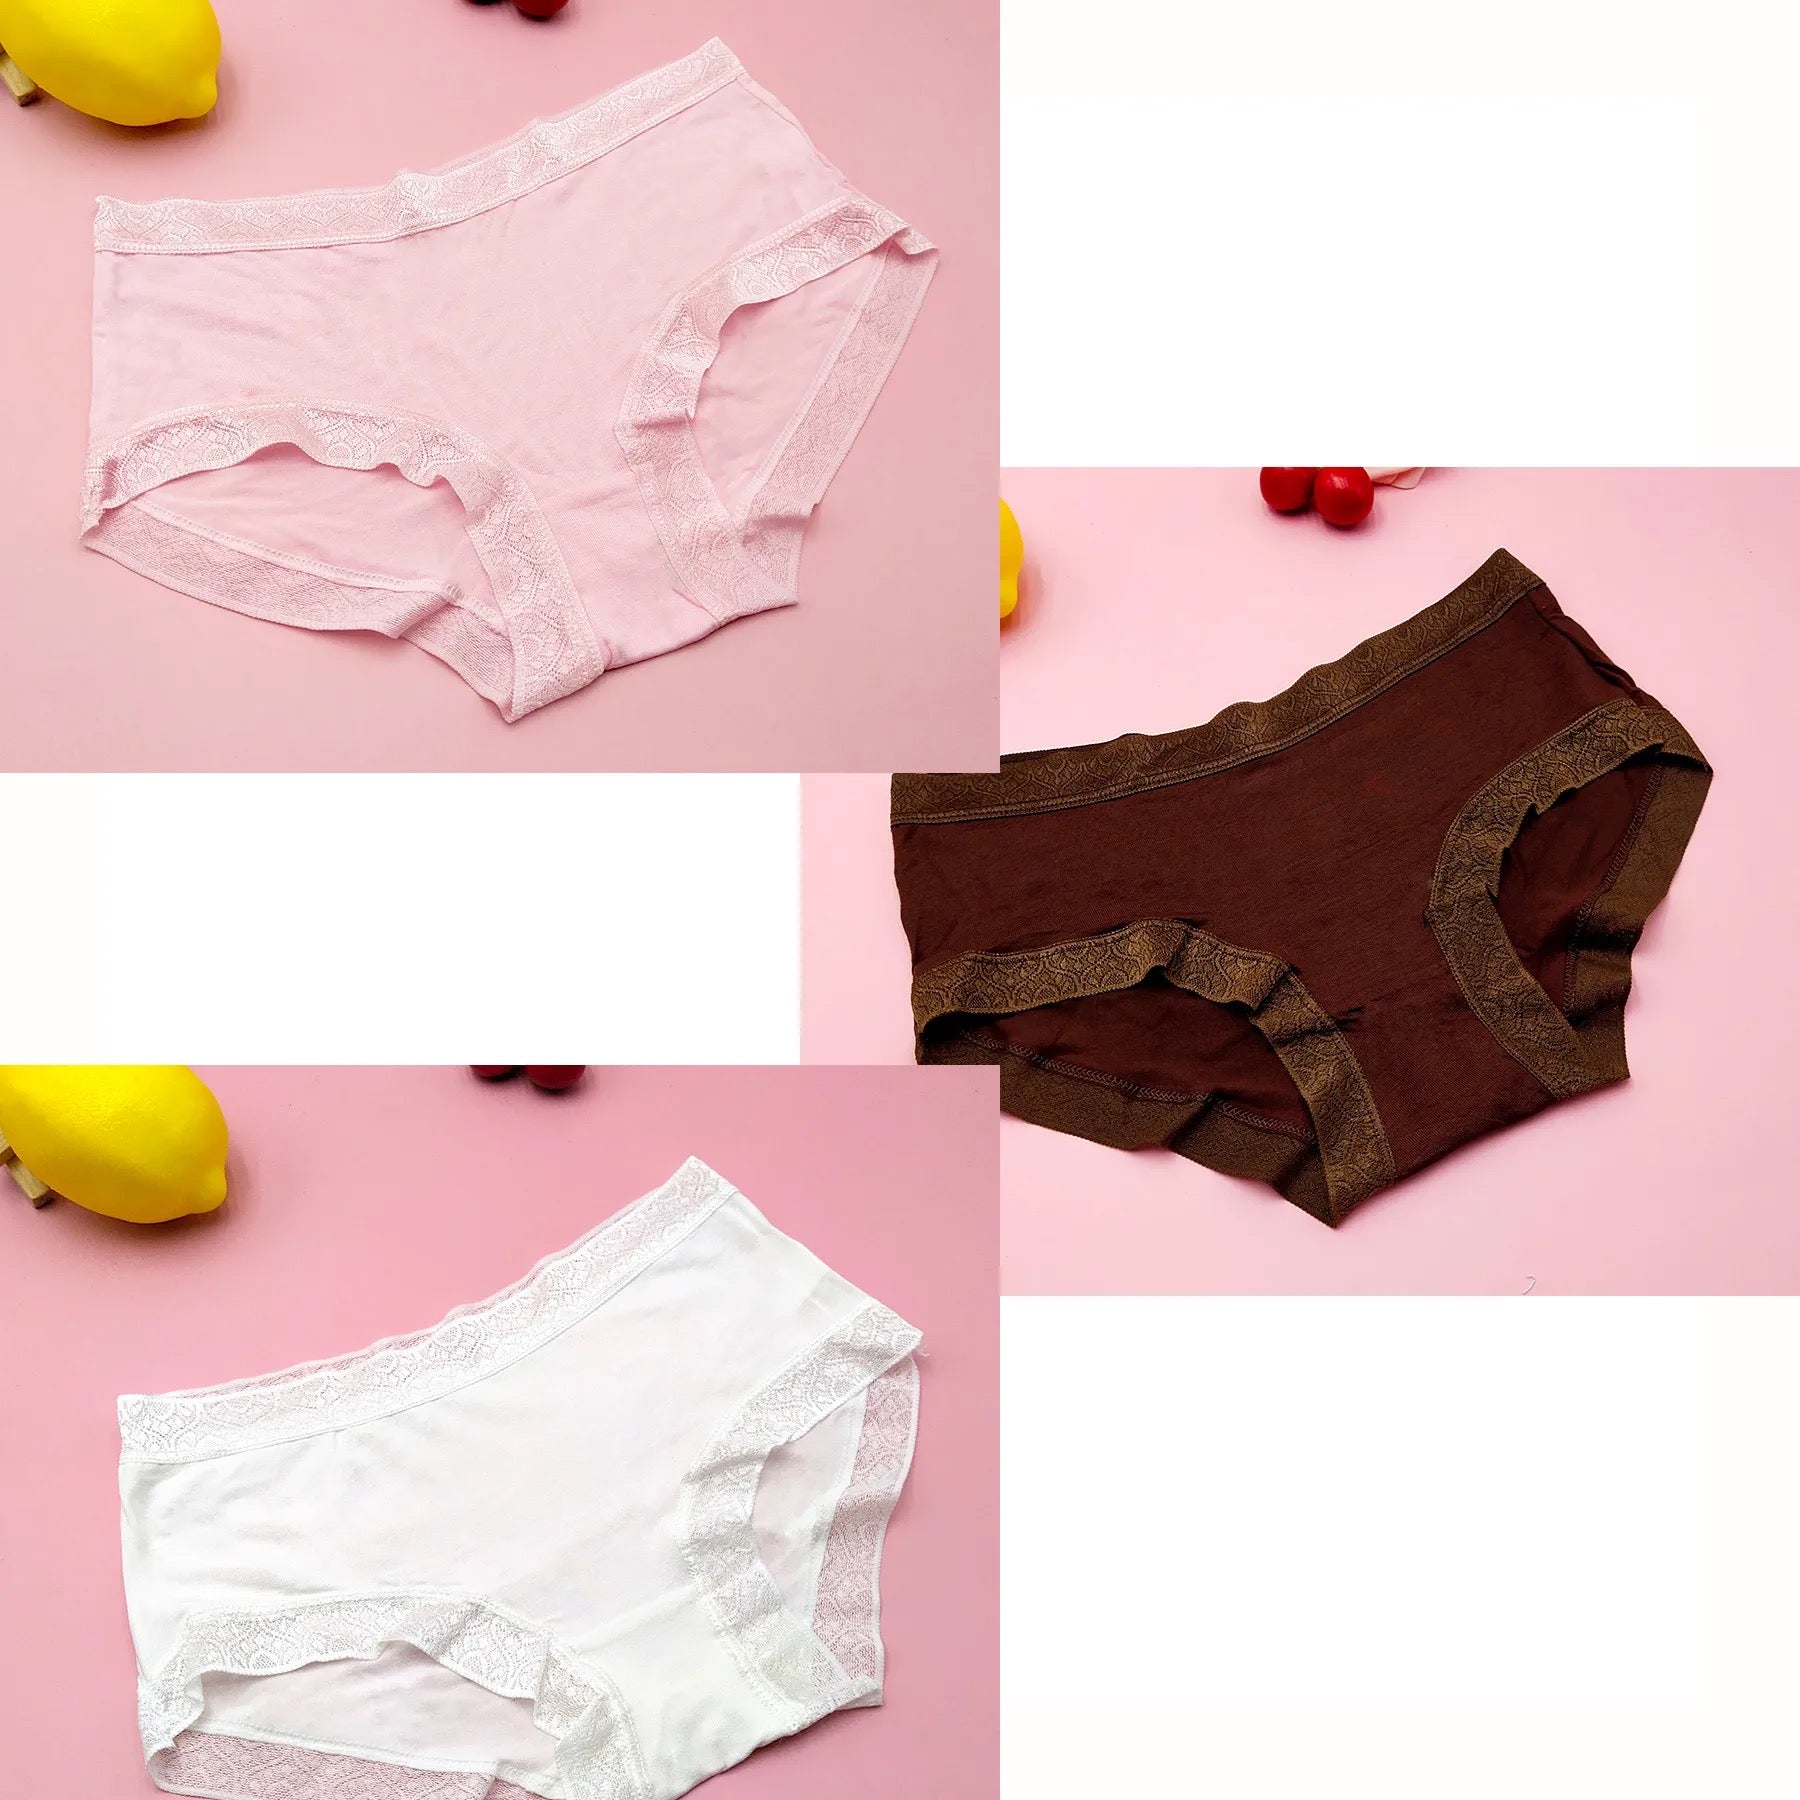 Lacy Absorbent Period Panty Underwear